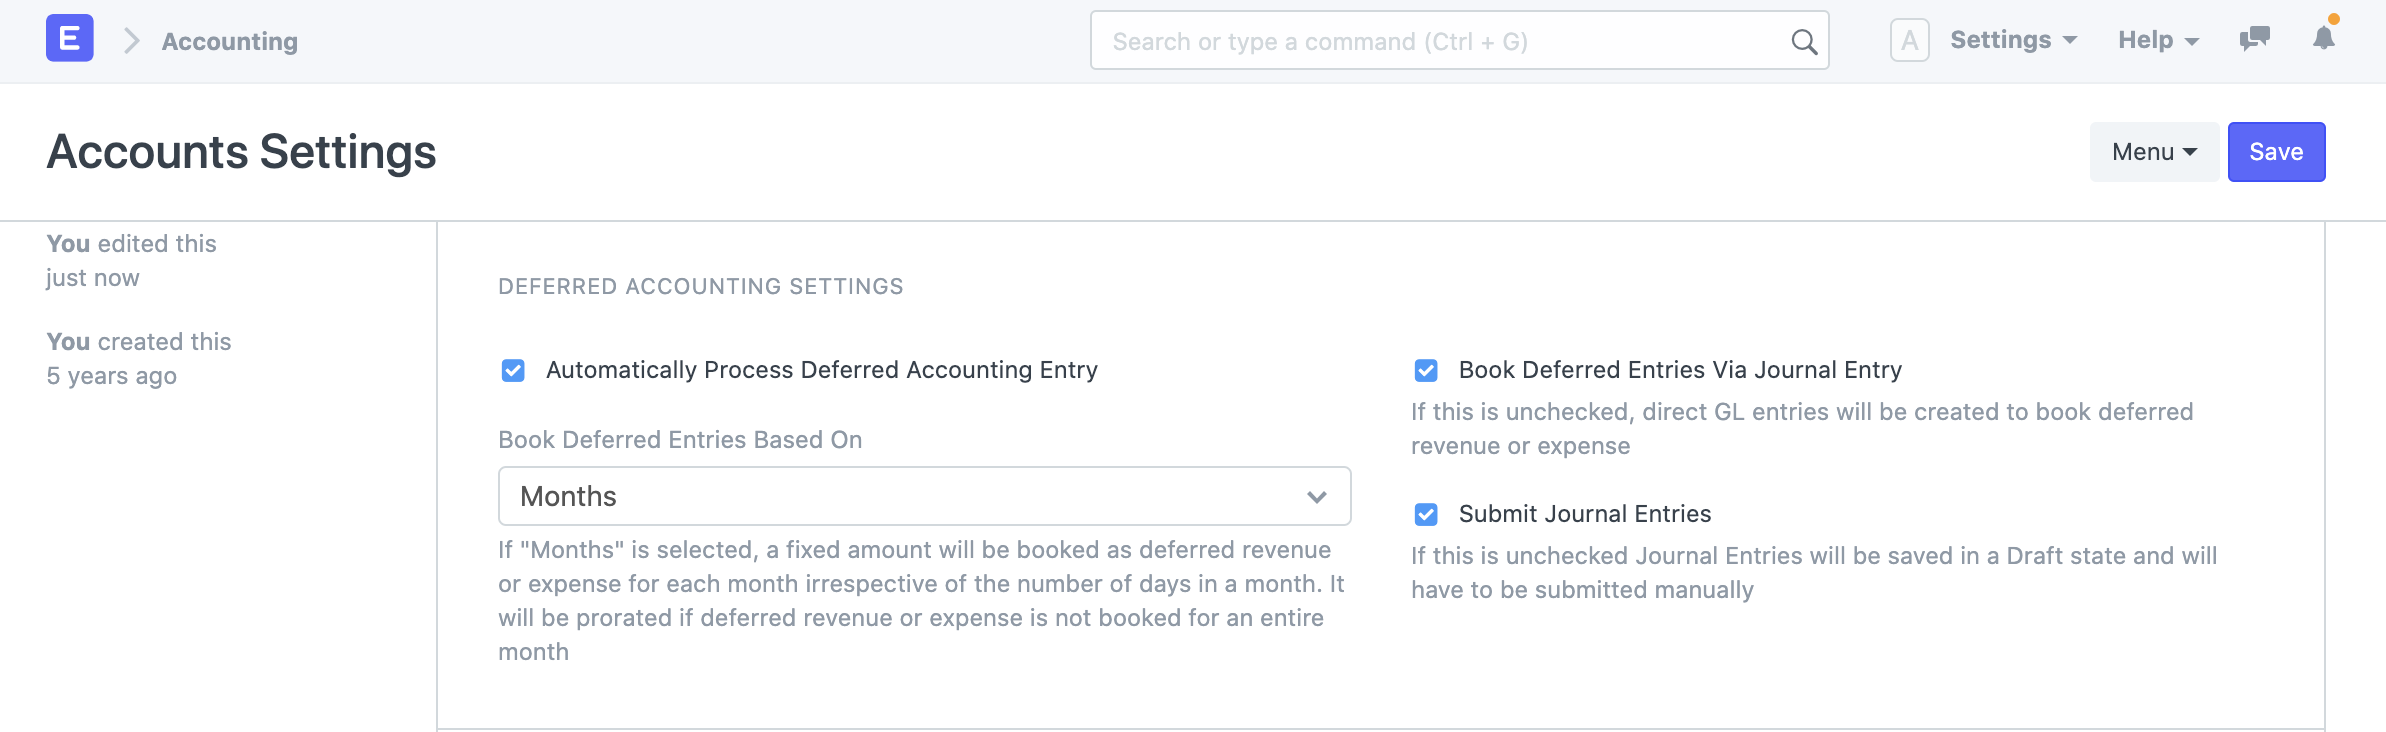 Deferred Accounting Settings